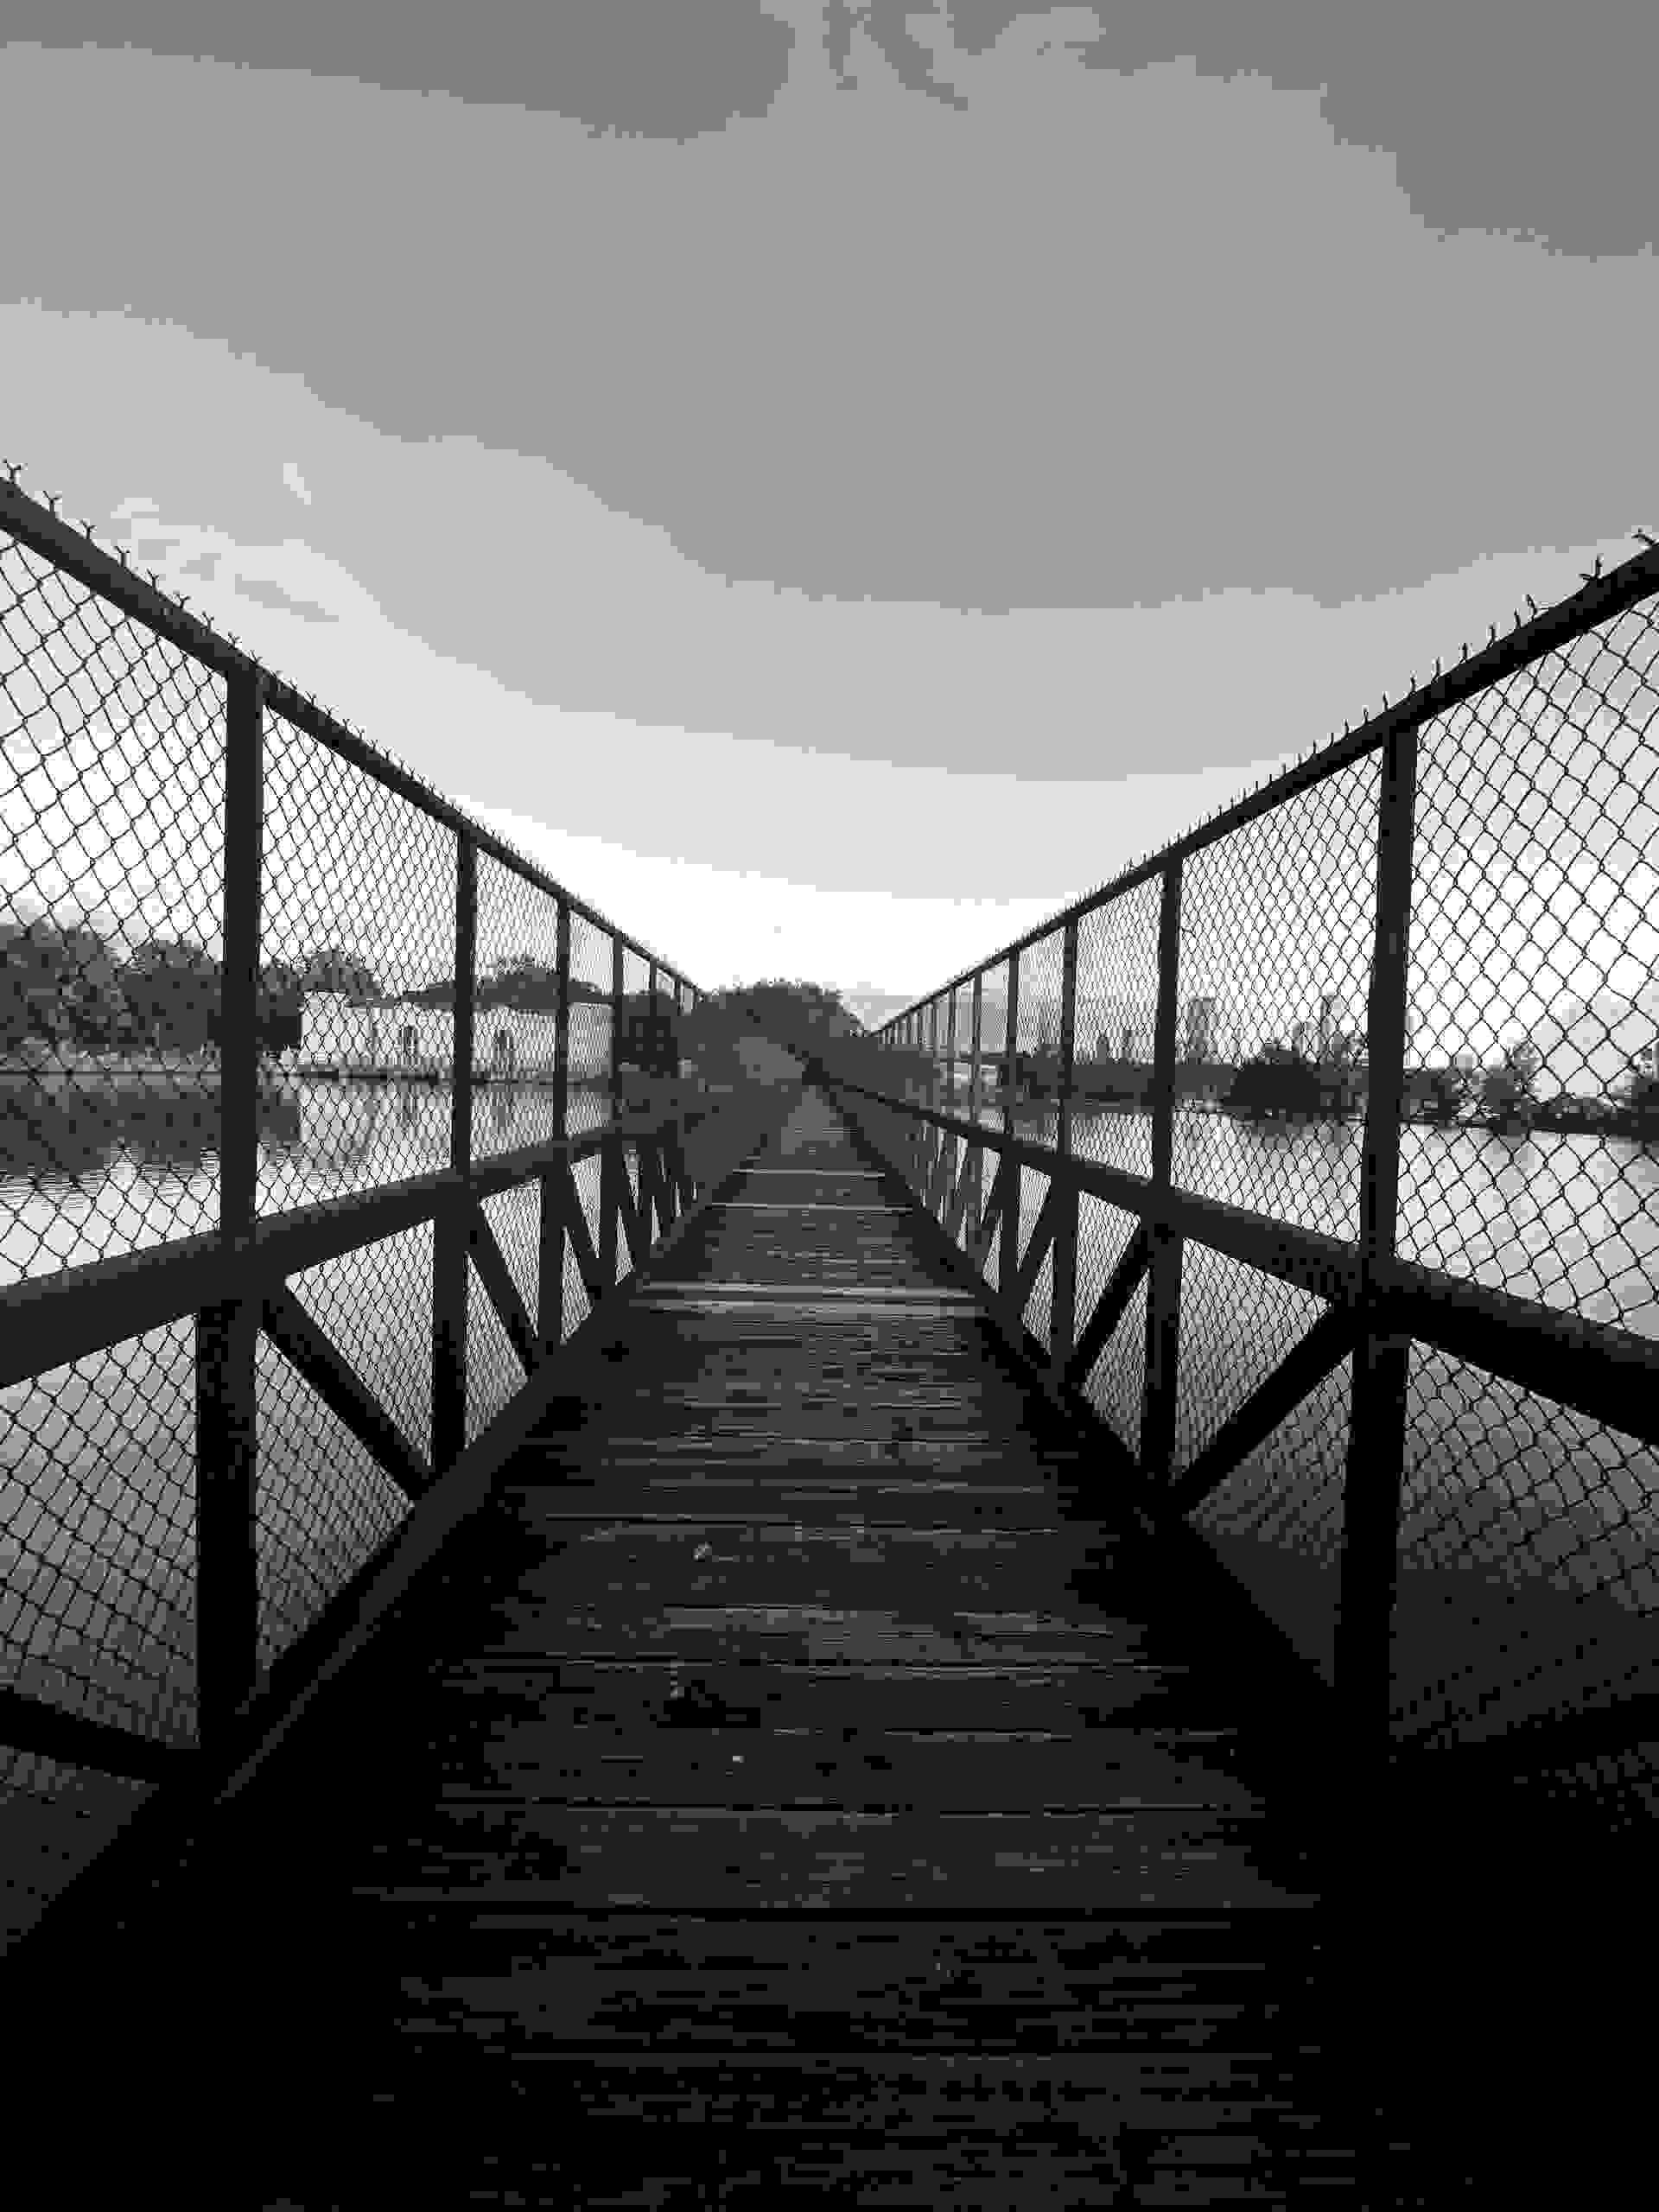 A bridge must be crossed one step at a time.